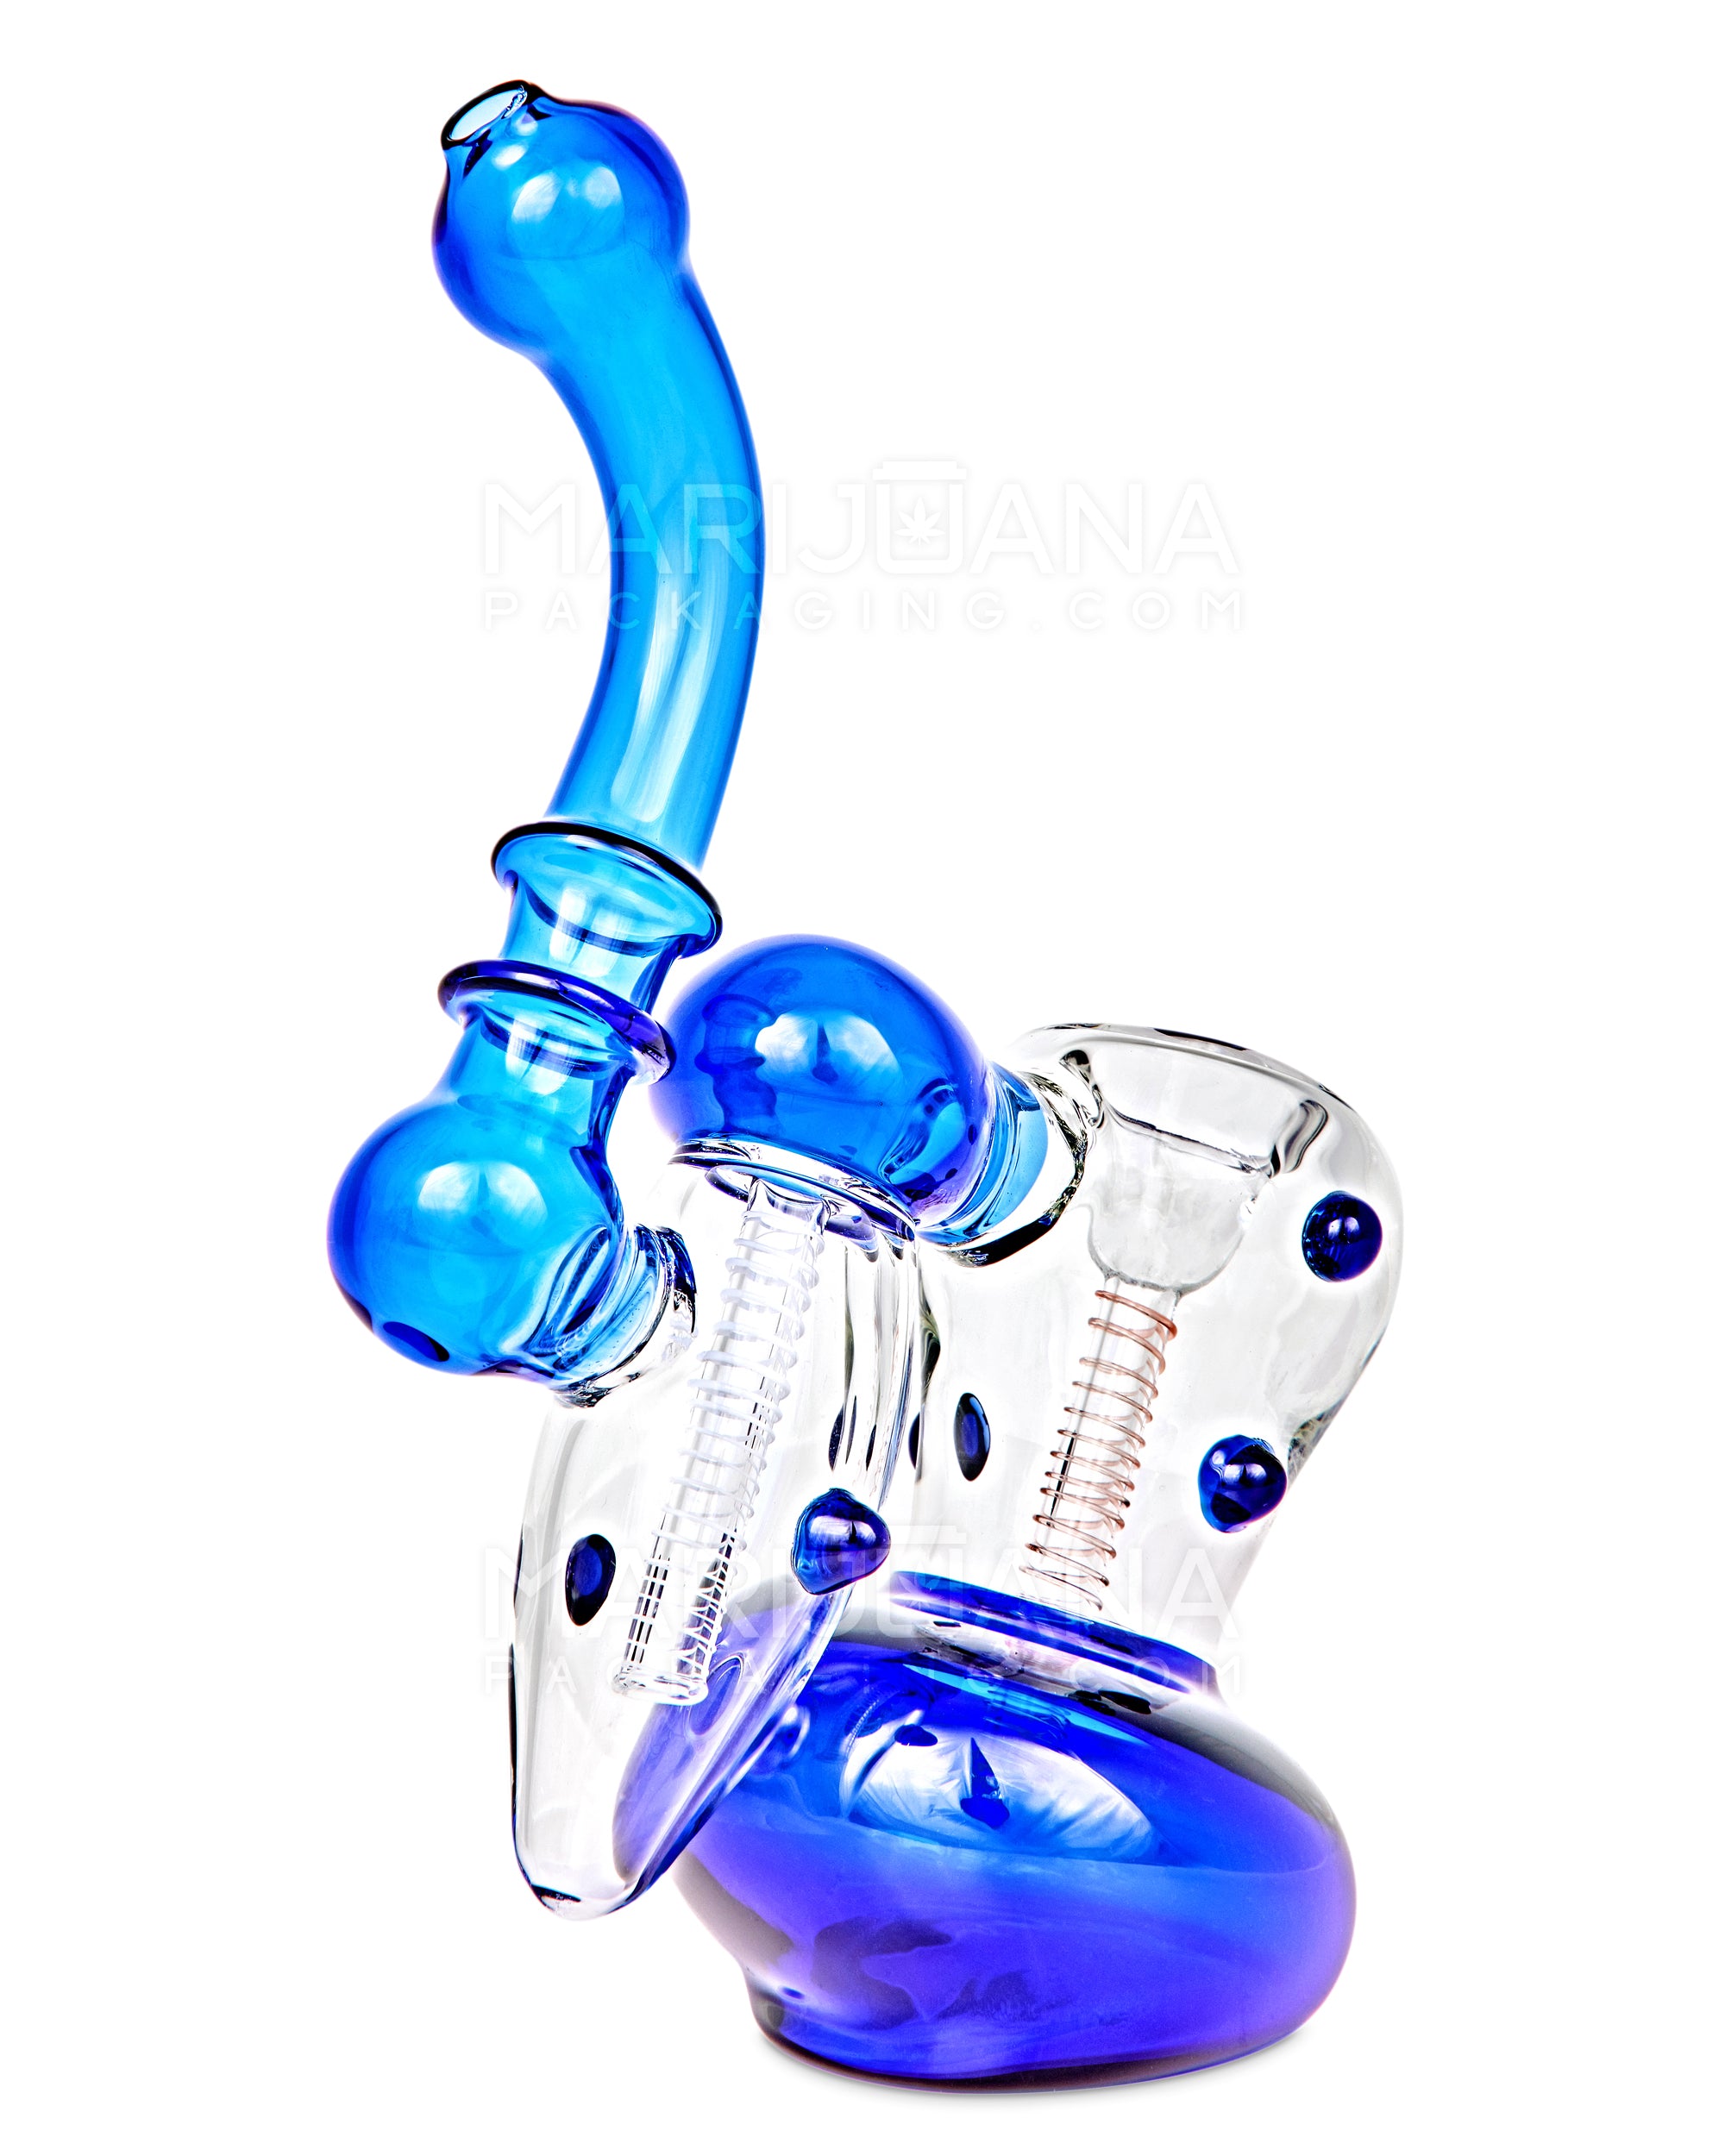 Ringed Double Chamber Bubbler w/ Multi Knockers | 7.5in Tall - Glass - Blue - 6